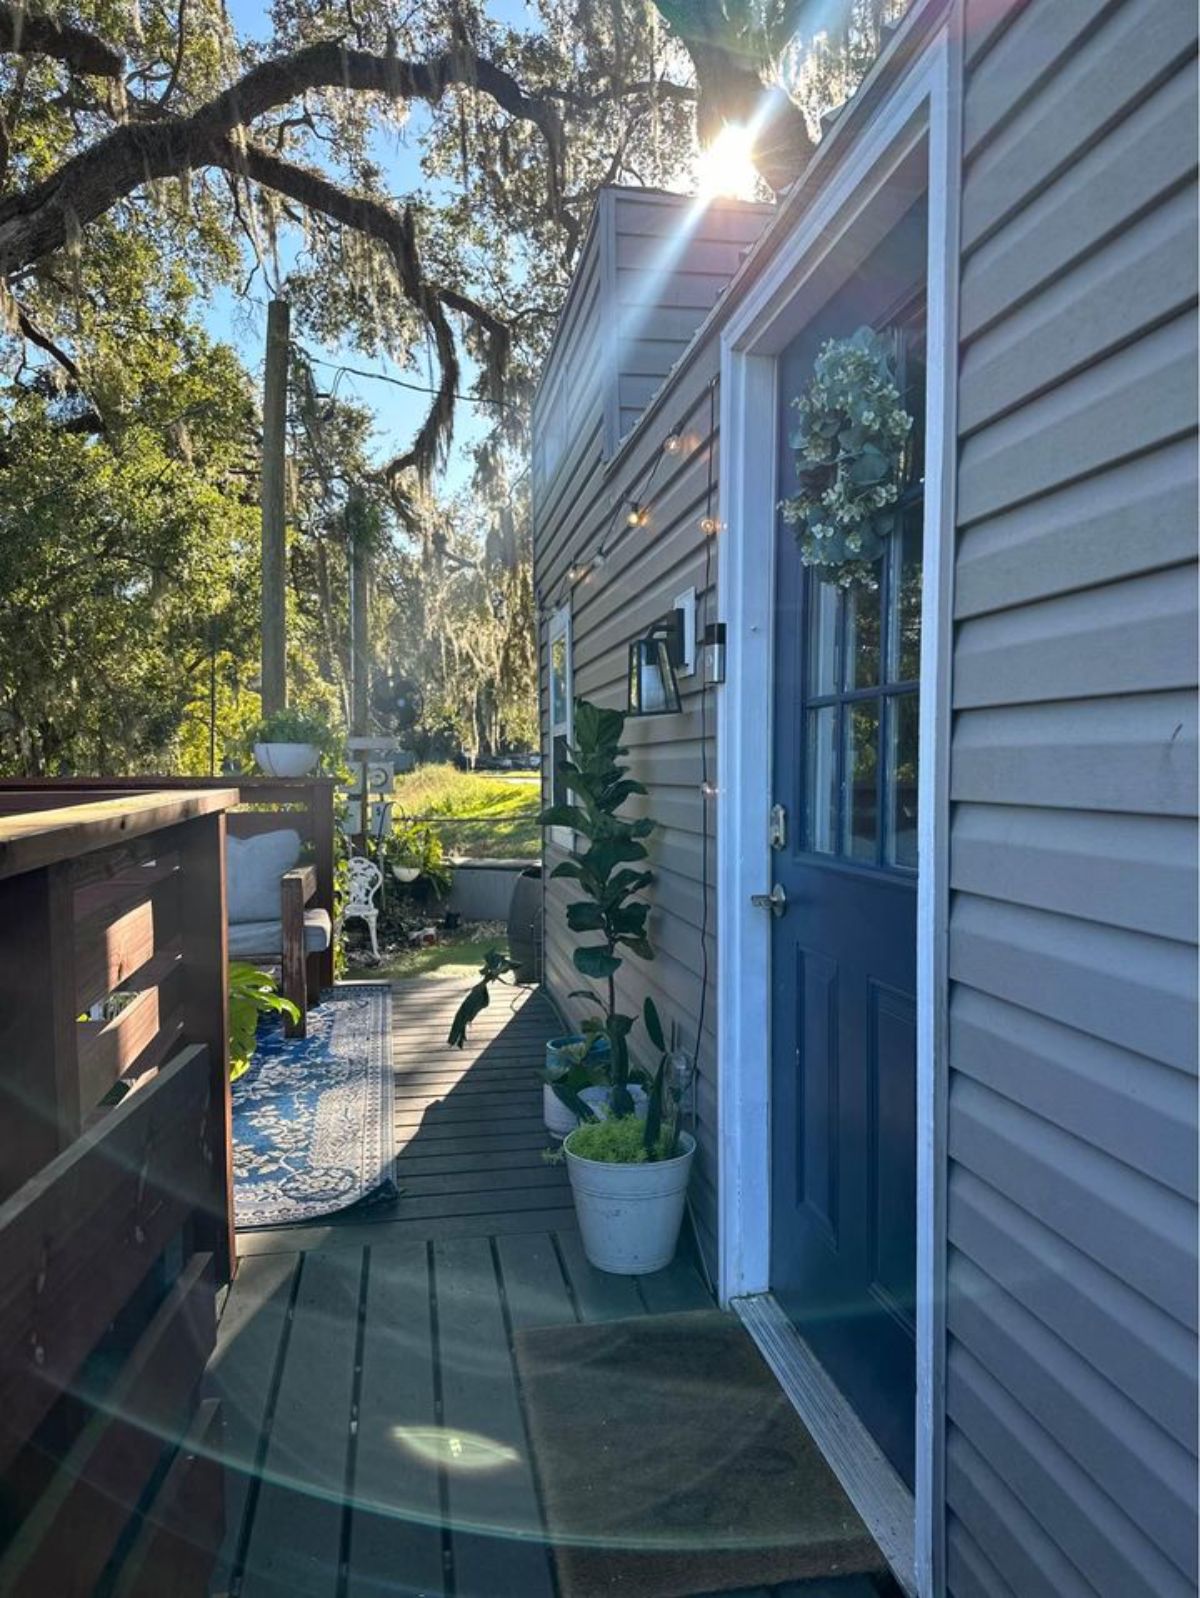 Main entrance door view of tiny home with two lofts